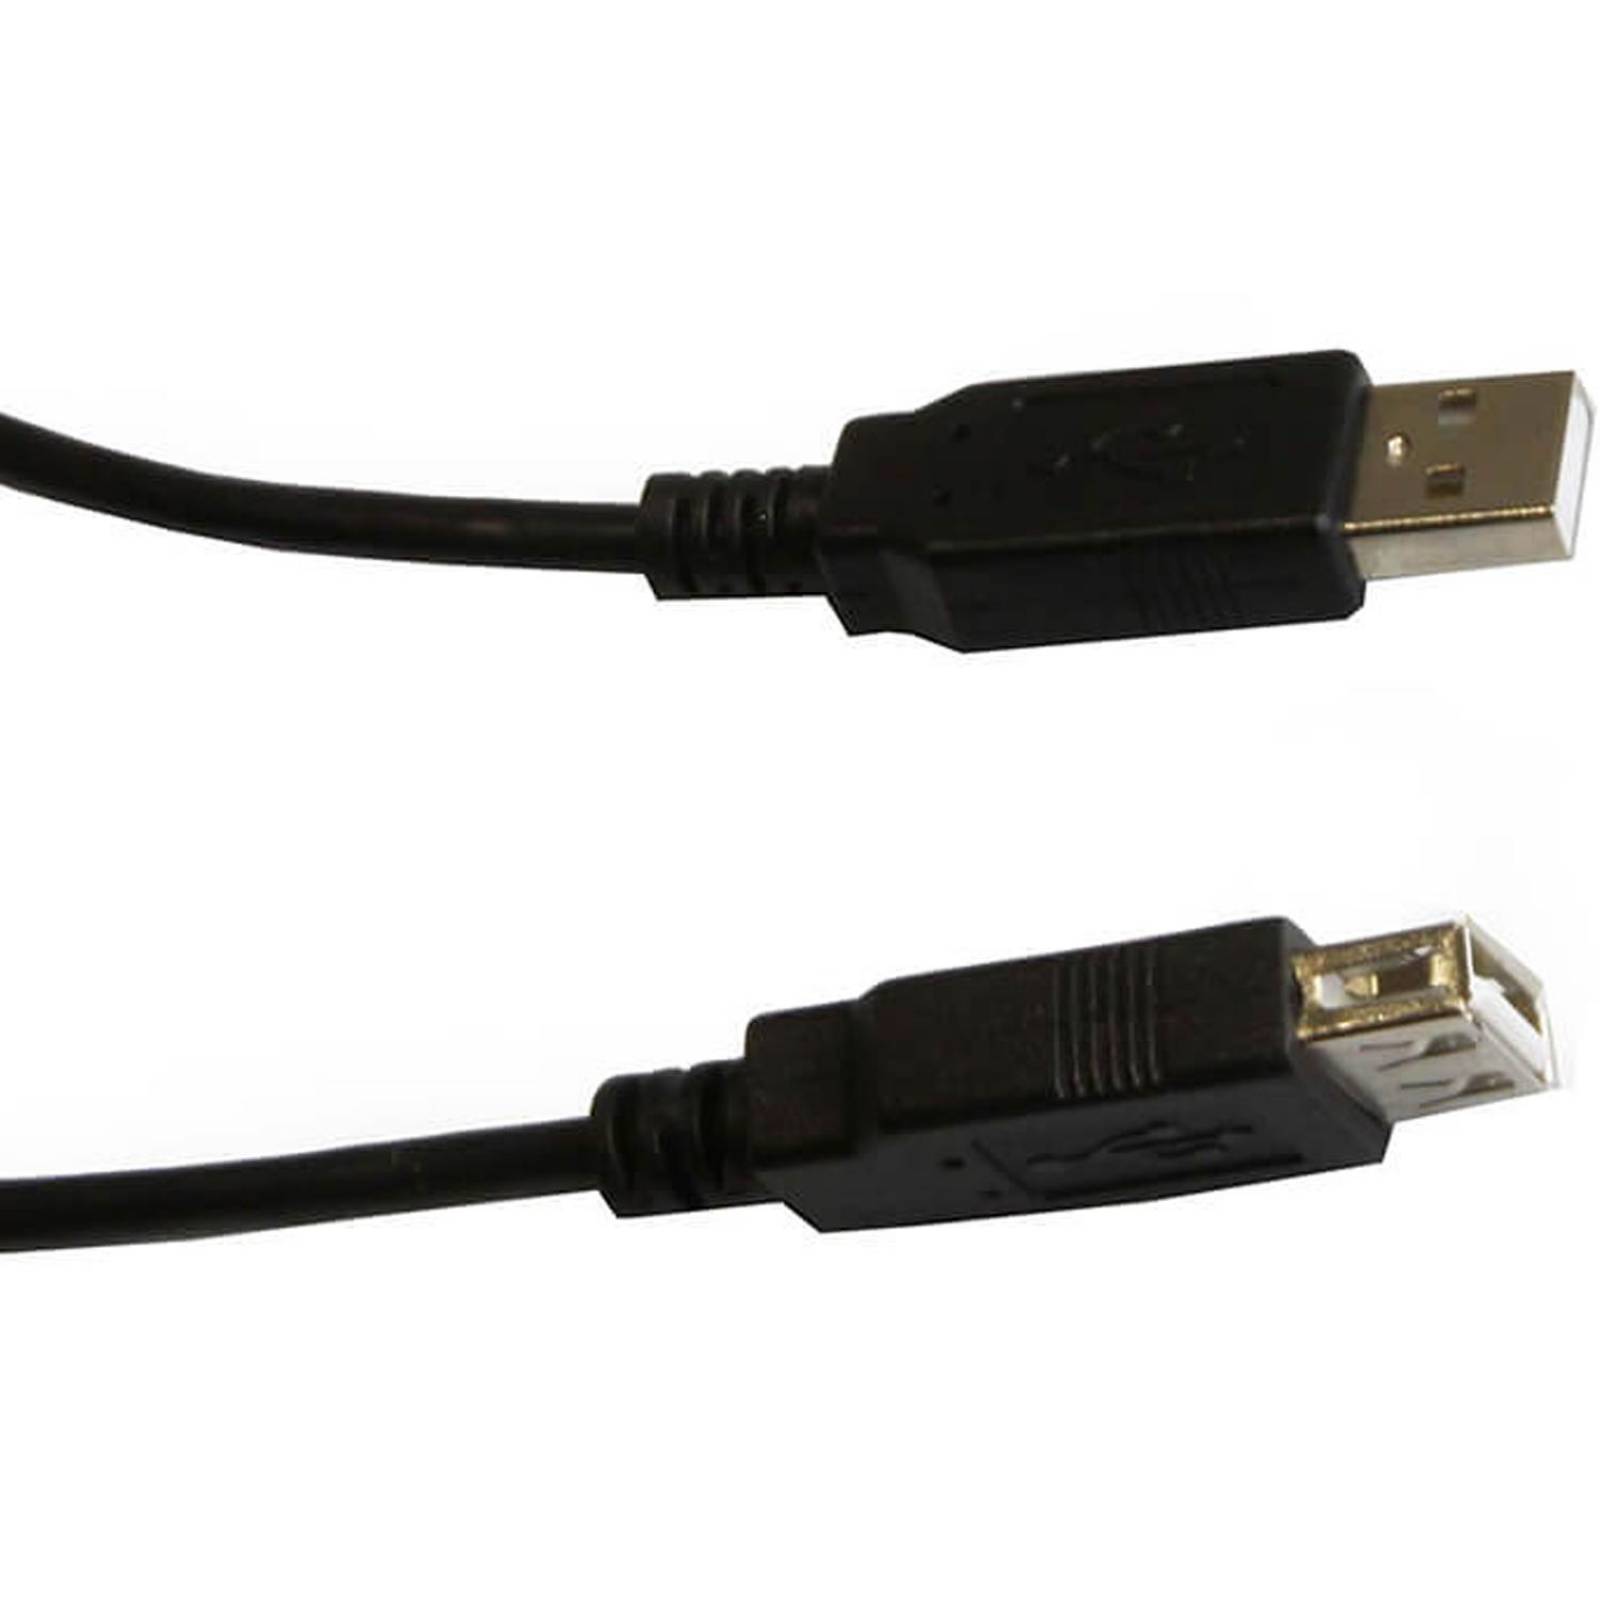 Extension Cable Usb 2.0 Macho Hembra 1.5mts GETTTECH JL-3520 